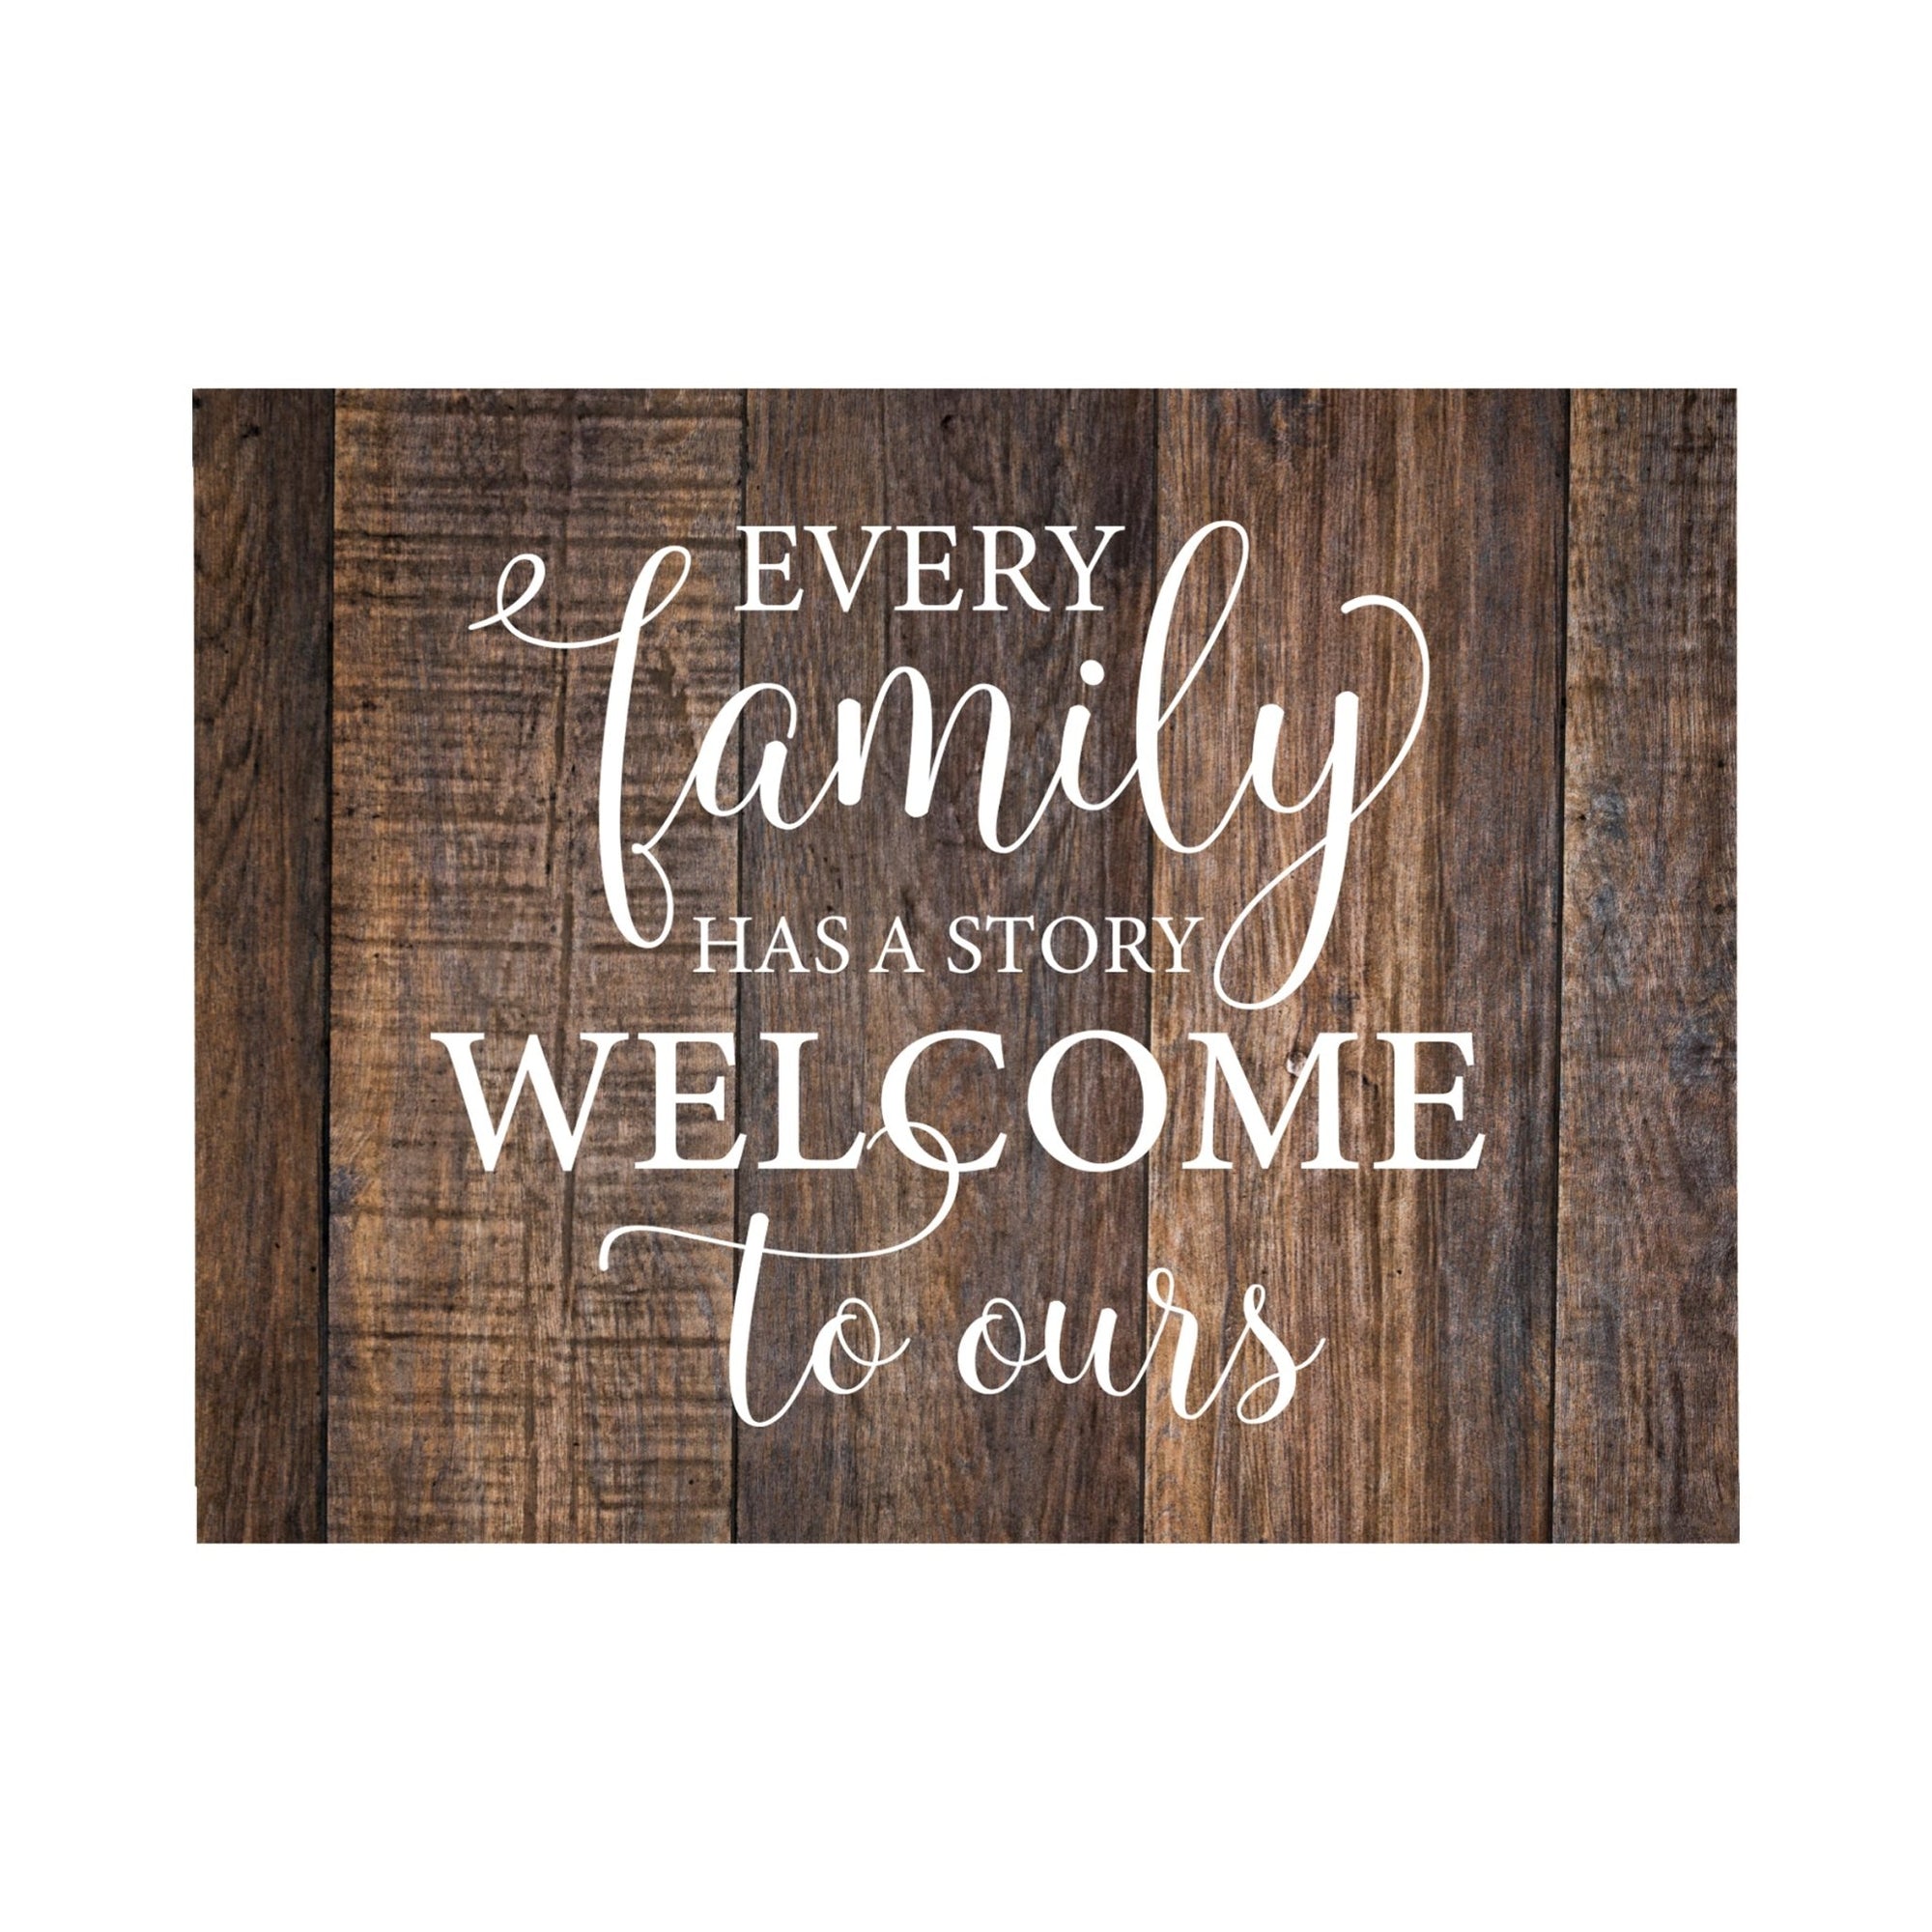 Everyday Inspirational 6.8 Wall Sign - Every Family Has - LifeSong Milestones